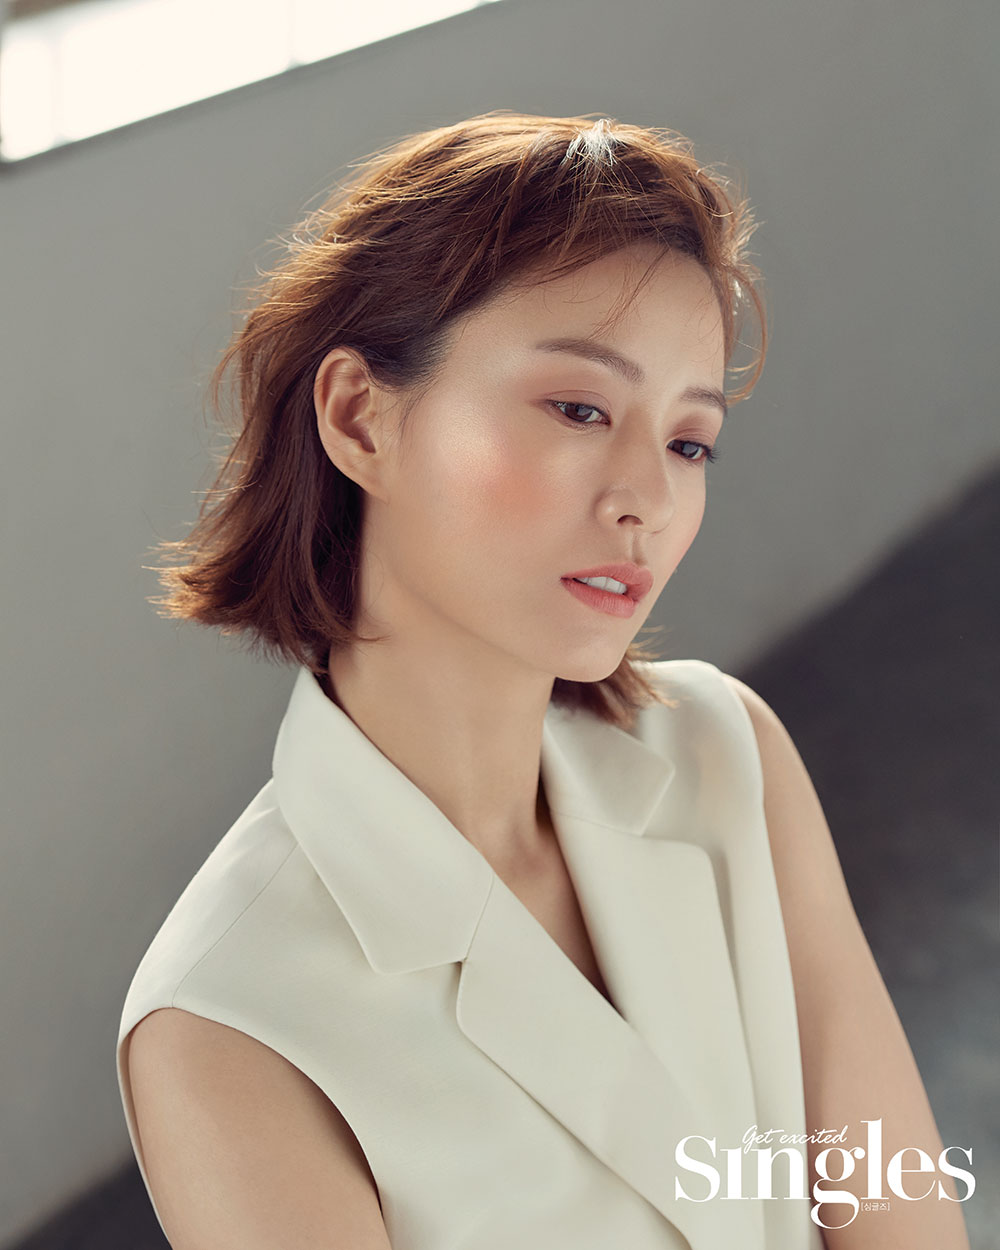 Actress Jung Yu-mi, who has been loved by various charms, has been released through Singles.In particular, this picture featured the cover of the September issue of Singles.In this picture, actor Jung Yu-mi is a back door that has been fully digested from various concepts ranging from chic and elegant to modern feeling with make-up using soft MLB Ginger color blusher and received praise from the staff of the filming site.Actor Jung Yu-mi played the role of new policeman Han Jeong-oh in the drama Live, which ended in May with a lot of love, convincingly acting the inside of a complex figure and leading the sympathy of many viewers.Actor Jung Yu-mi, who has expressed his character with his unique loveliness and has established the position of Roco Queen with the nickname Blee, has earned a reputation that he can fully digest the genre.Roco-myeon Roco, genre-style genre, and colorful charm actor Jung Yu-mis pictorials that digest all concepts and roles can be found in the September issue of Singles for imposing singles and the pleasant online playground Singles mobile.Photo: Singles